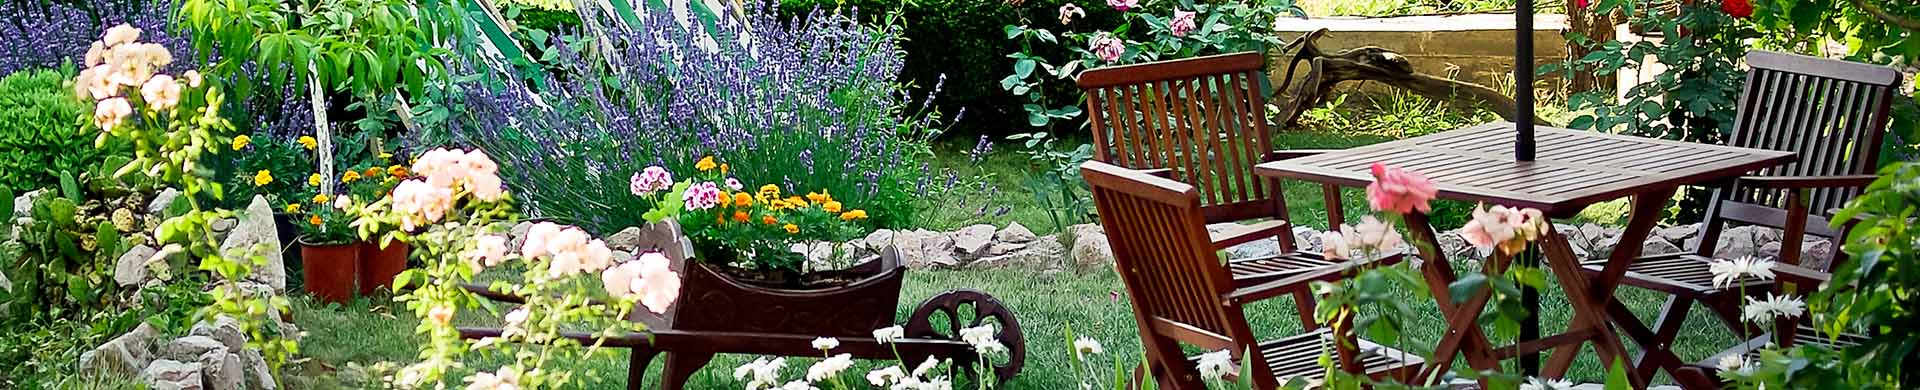 Garden With Flowers, Table and Chairs